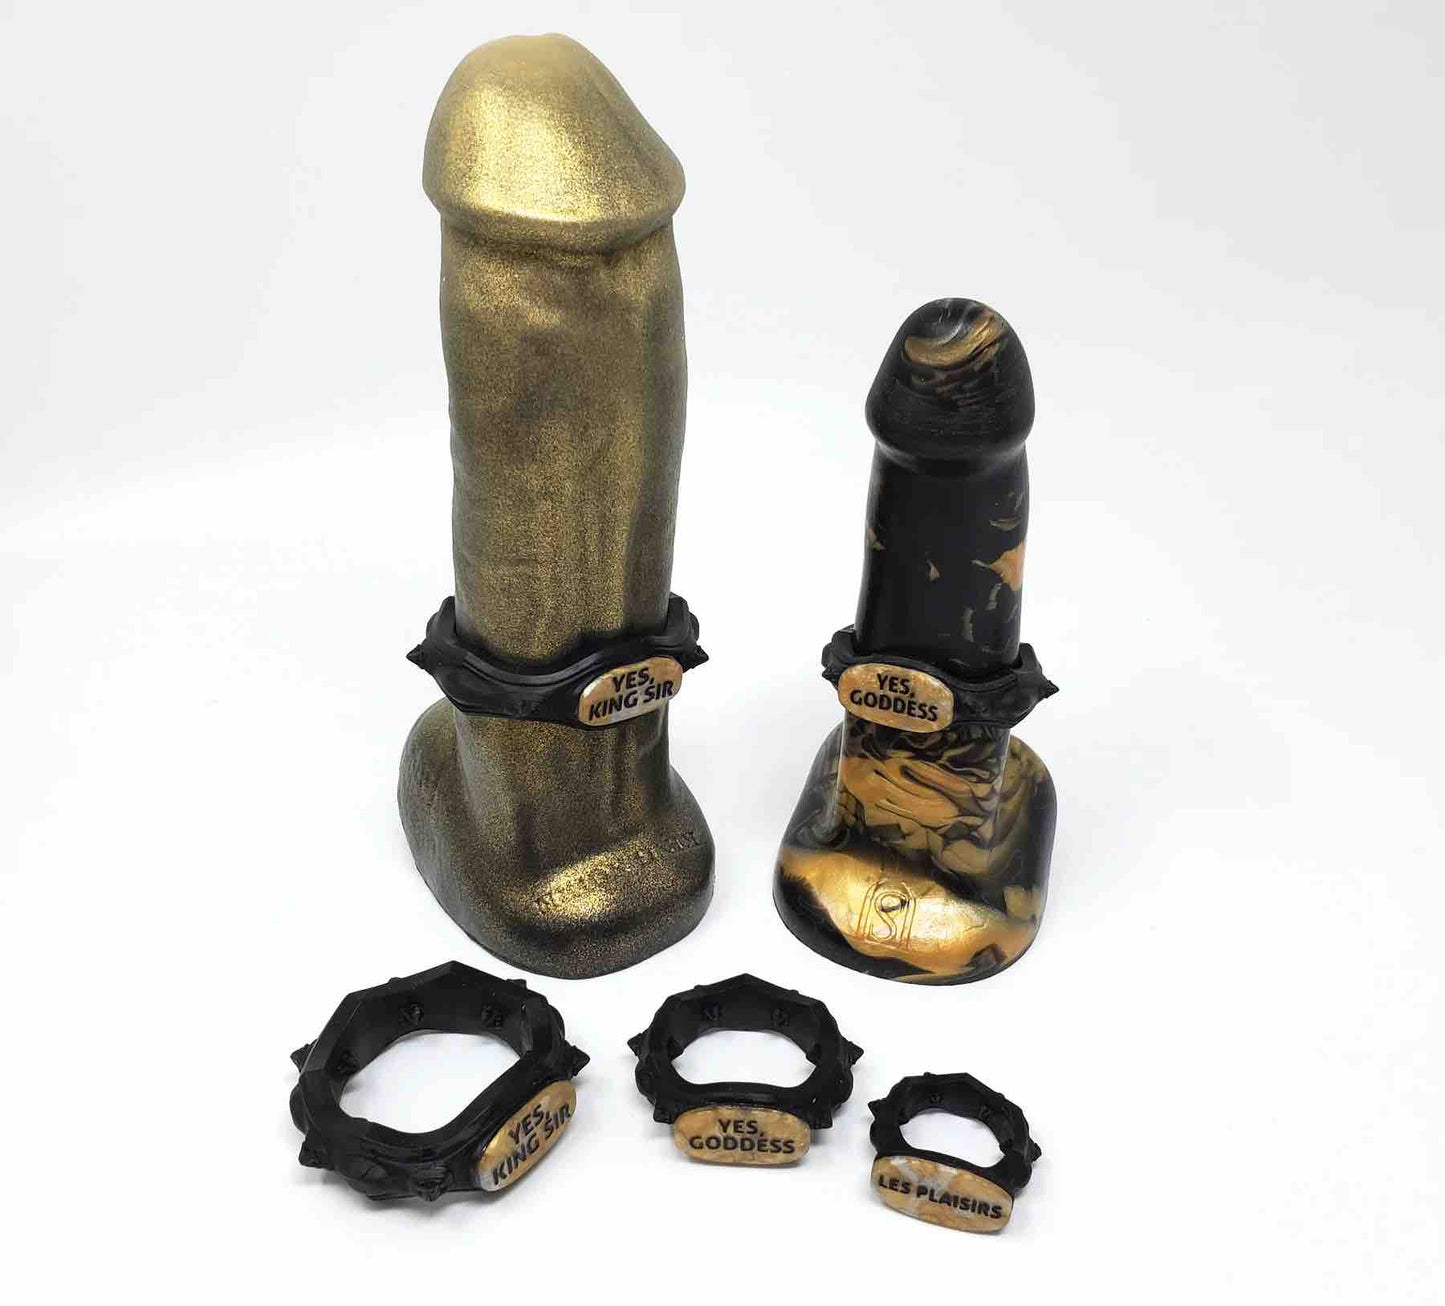 Three black and gold Royal Fetish FEMDOM Edging Body Bands sitting in front of two black and gold dildos with body bands on them.